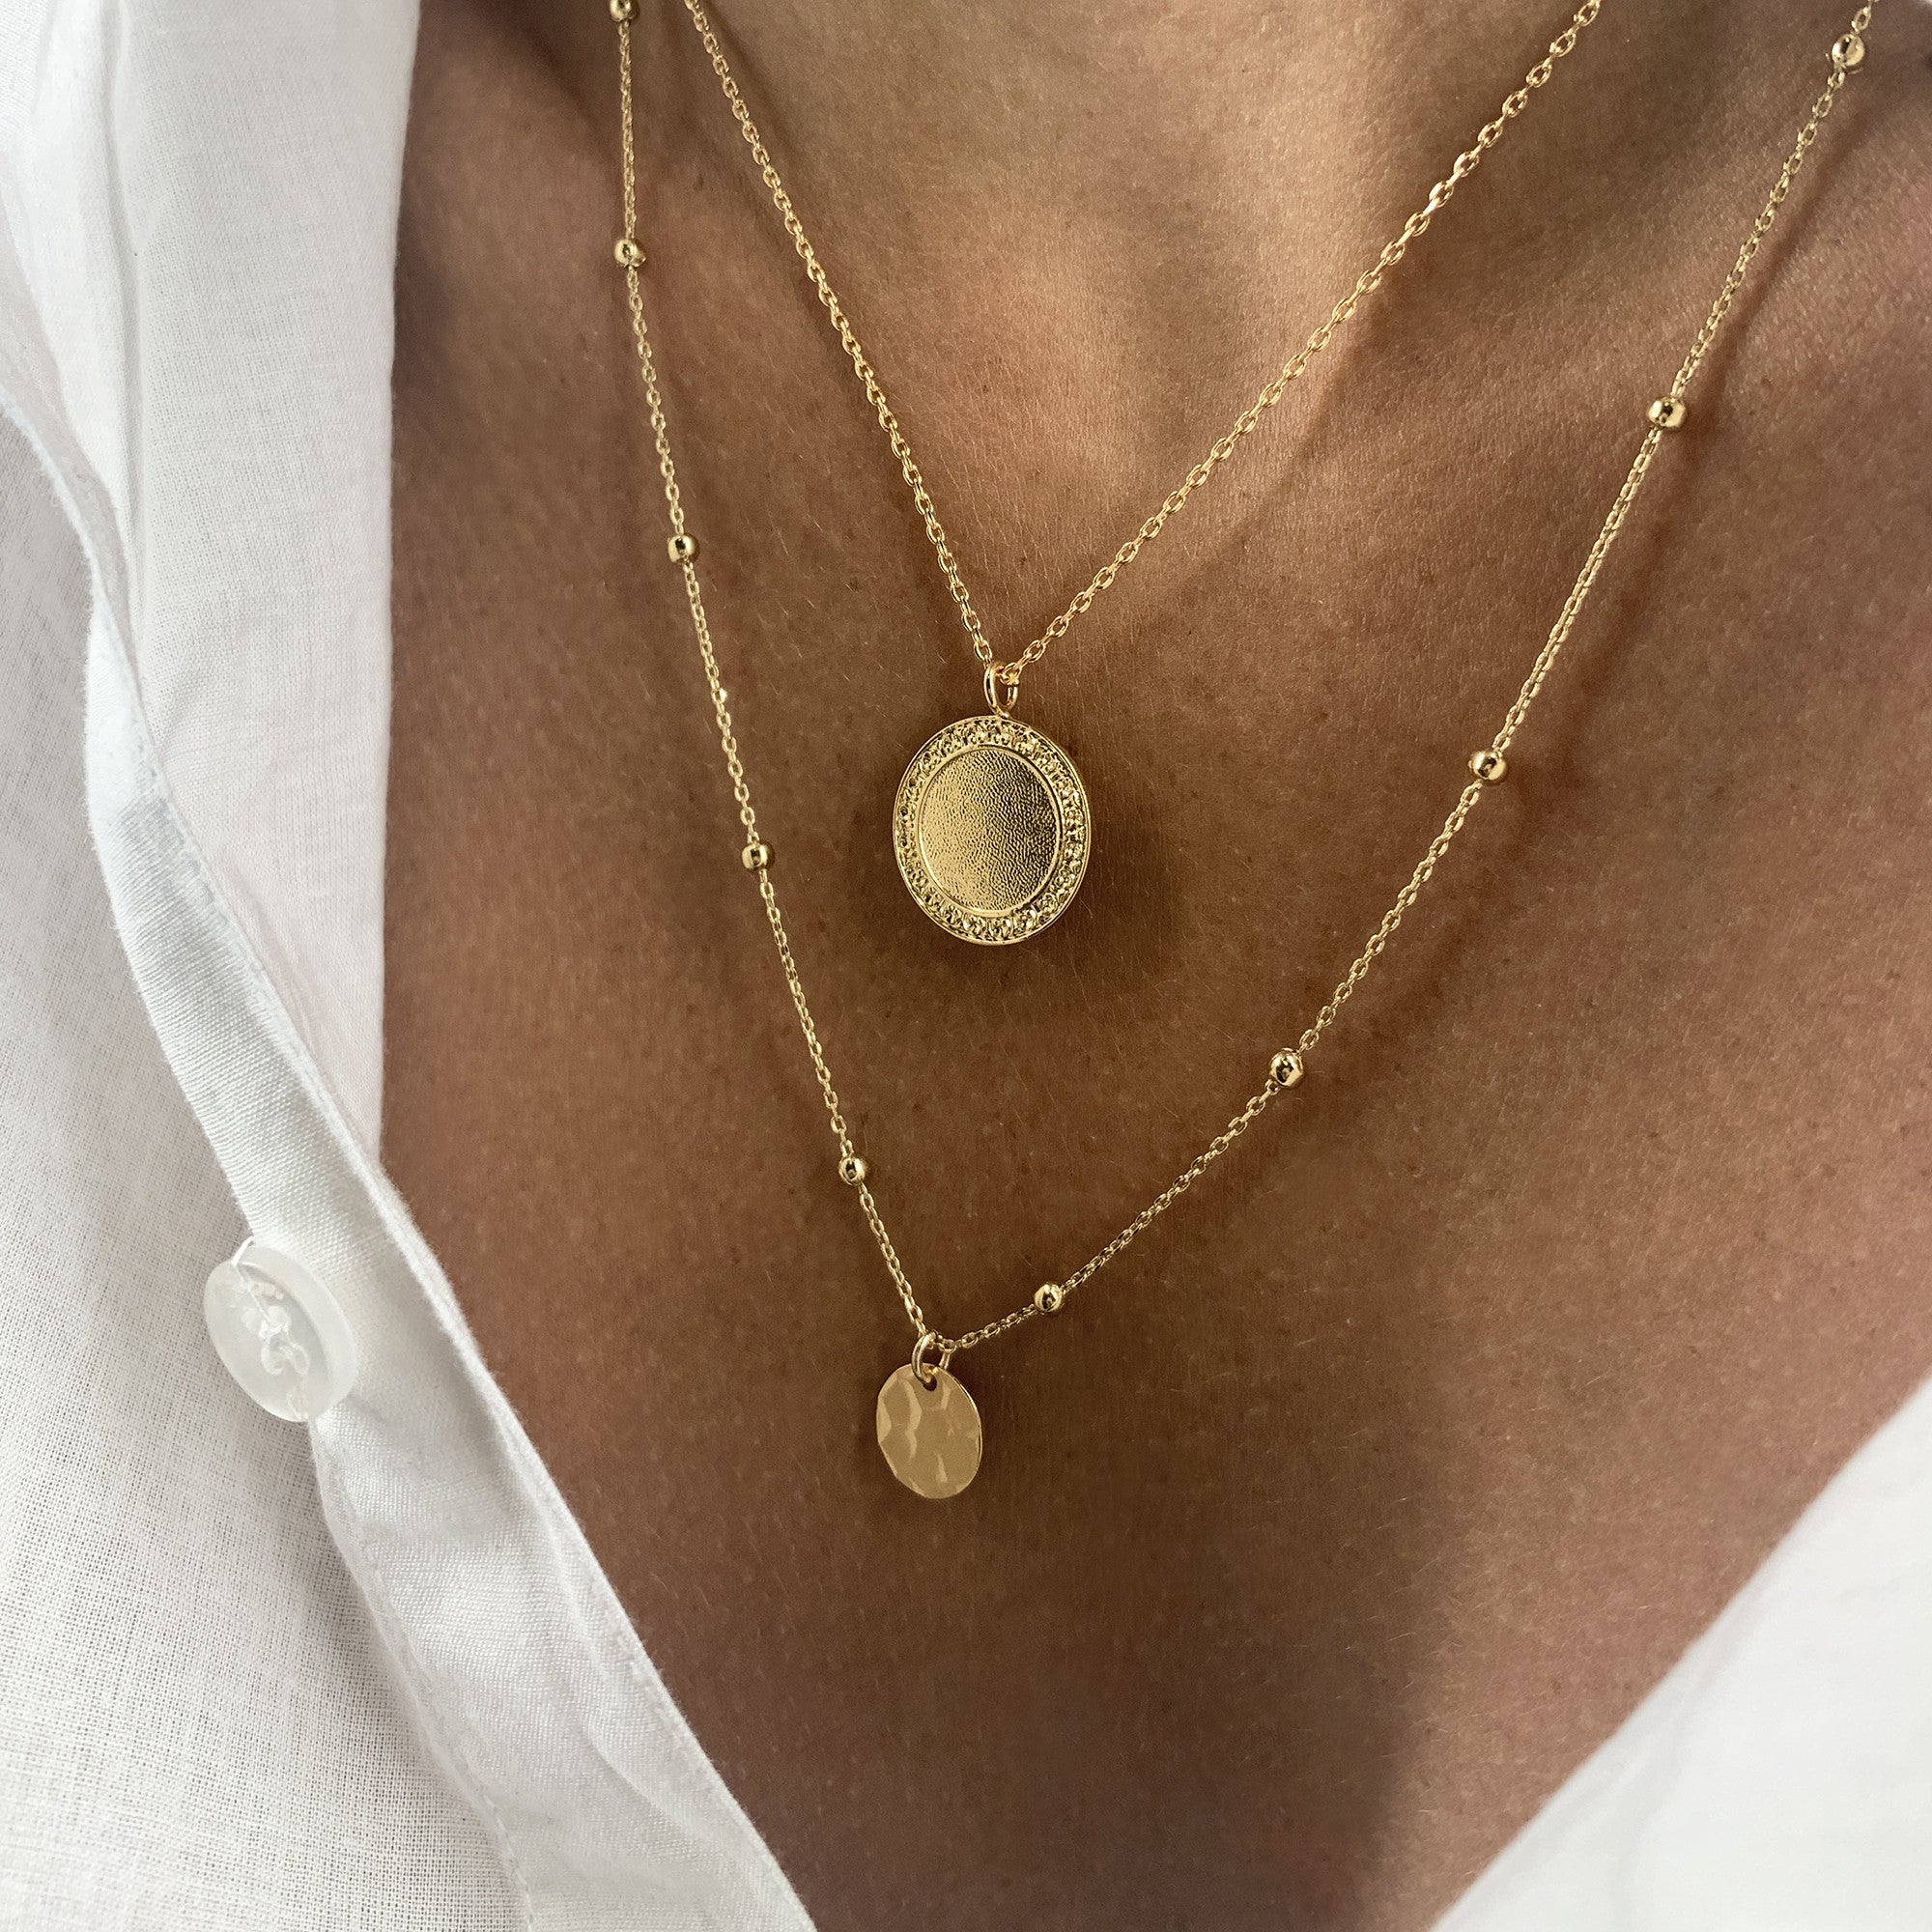 Hammered medal ball necklace